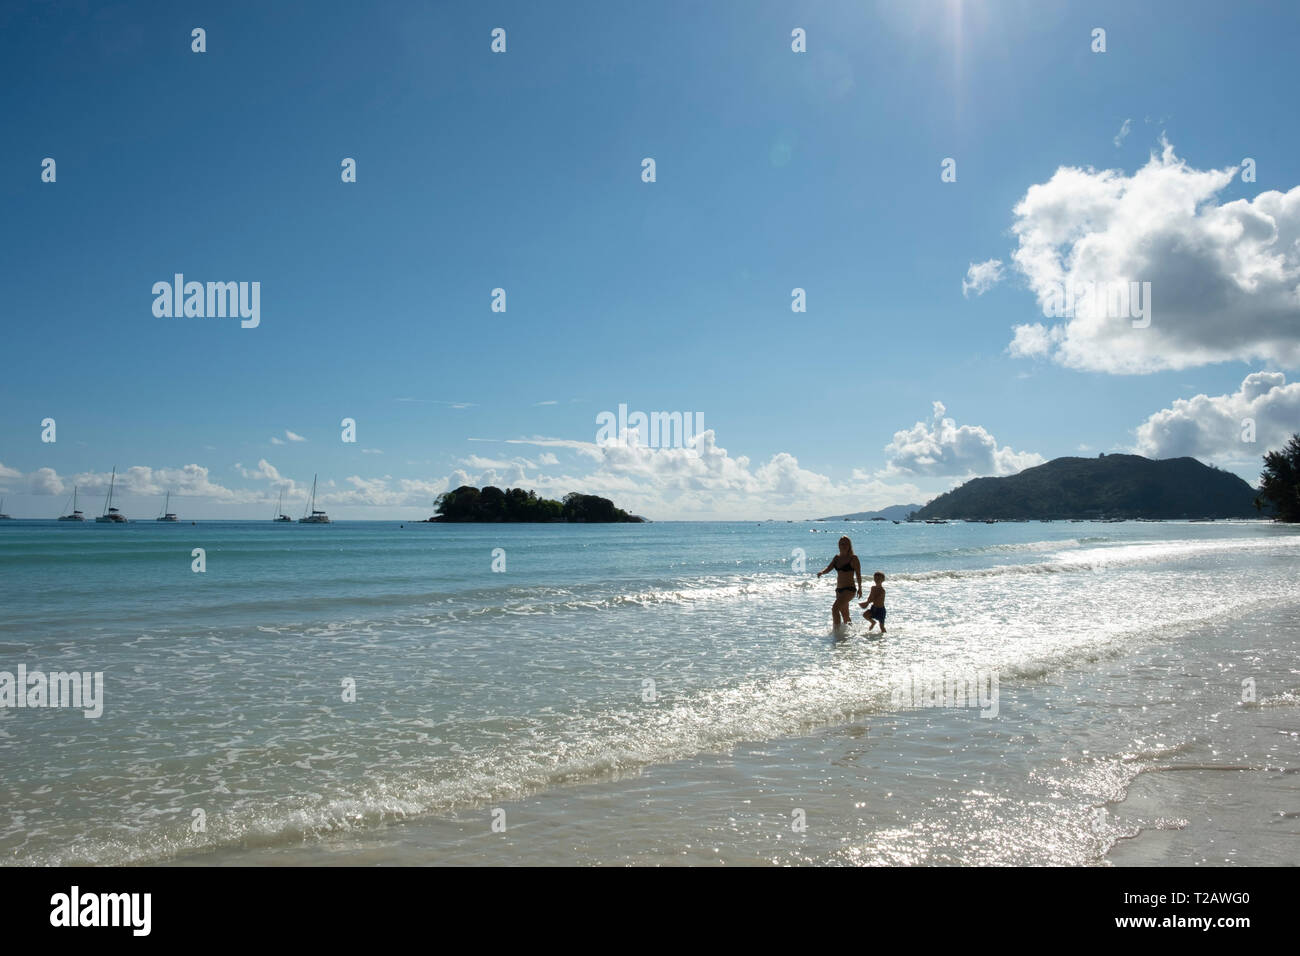 A mother and son walking in the surf on Anse Volbert, Praslin, the Seychelles Stock Photo